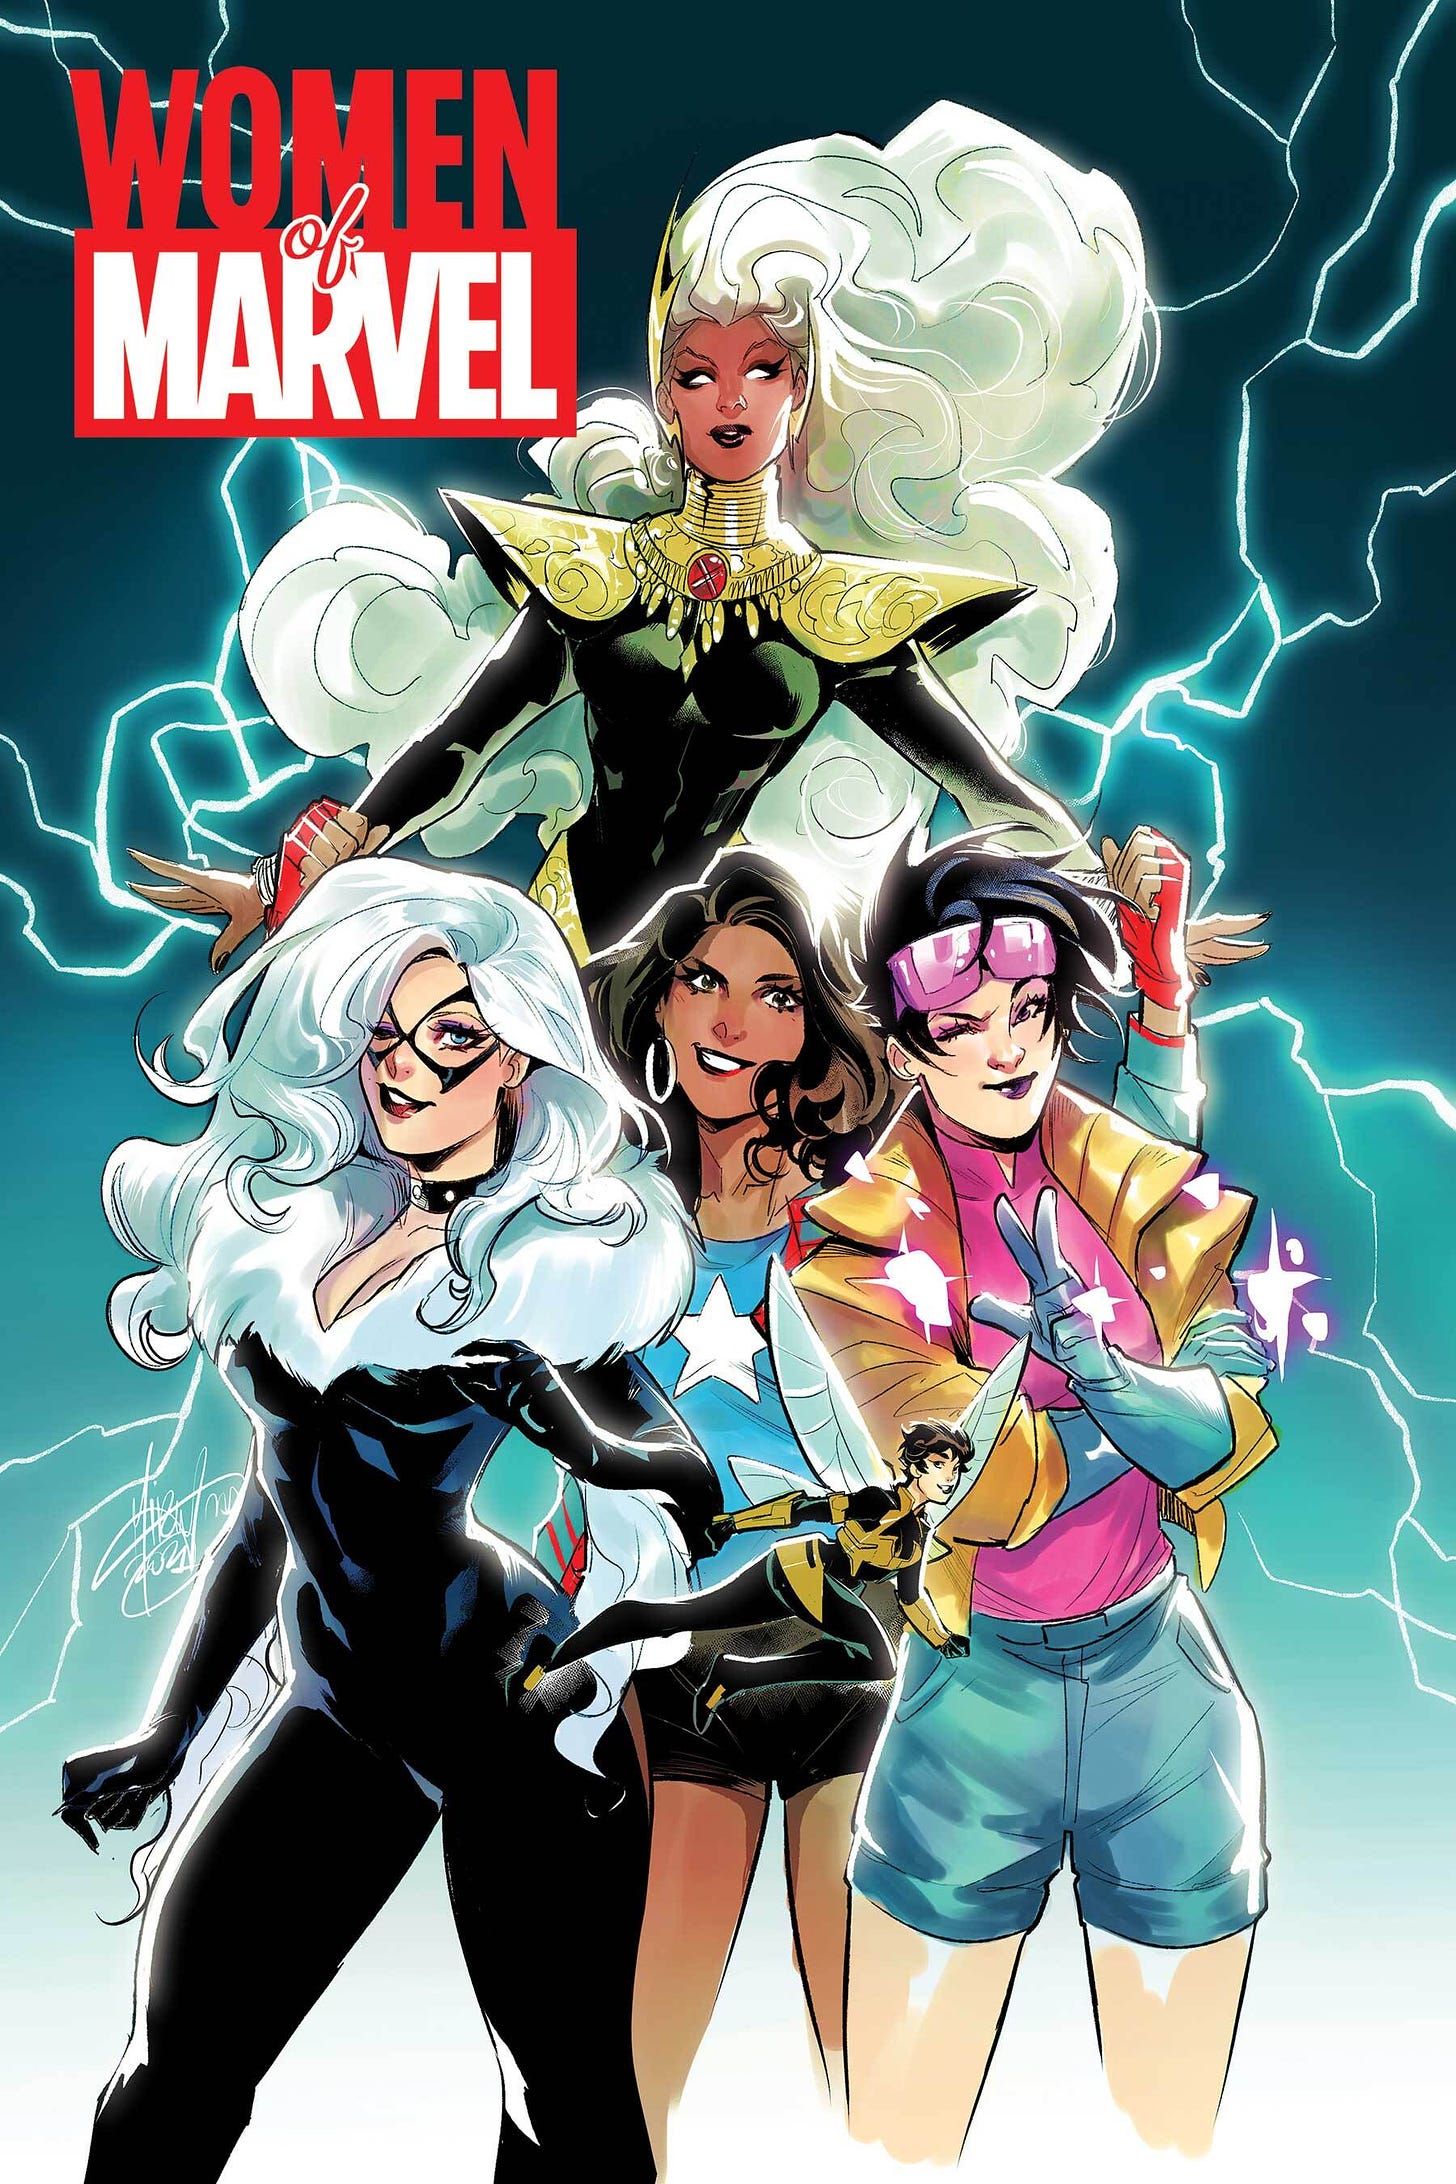 Women of Marvel cover featuring Storm, Jubilee, Black Cat, and America Chavez